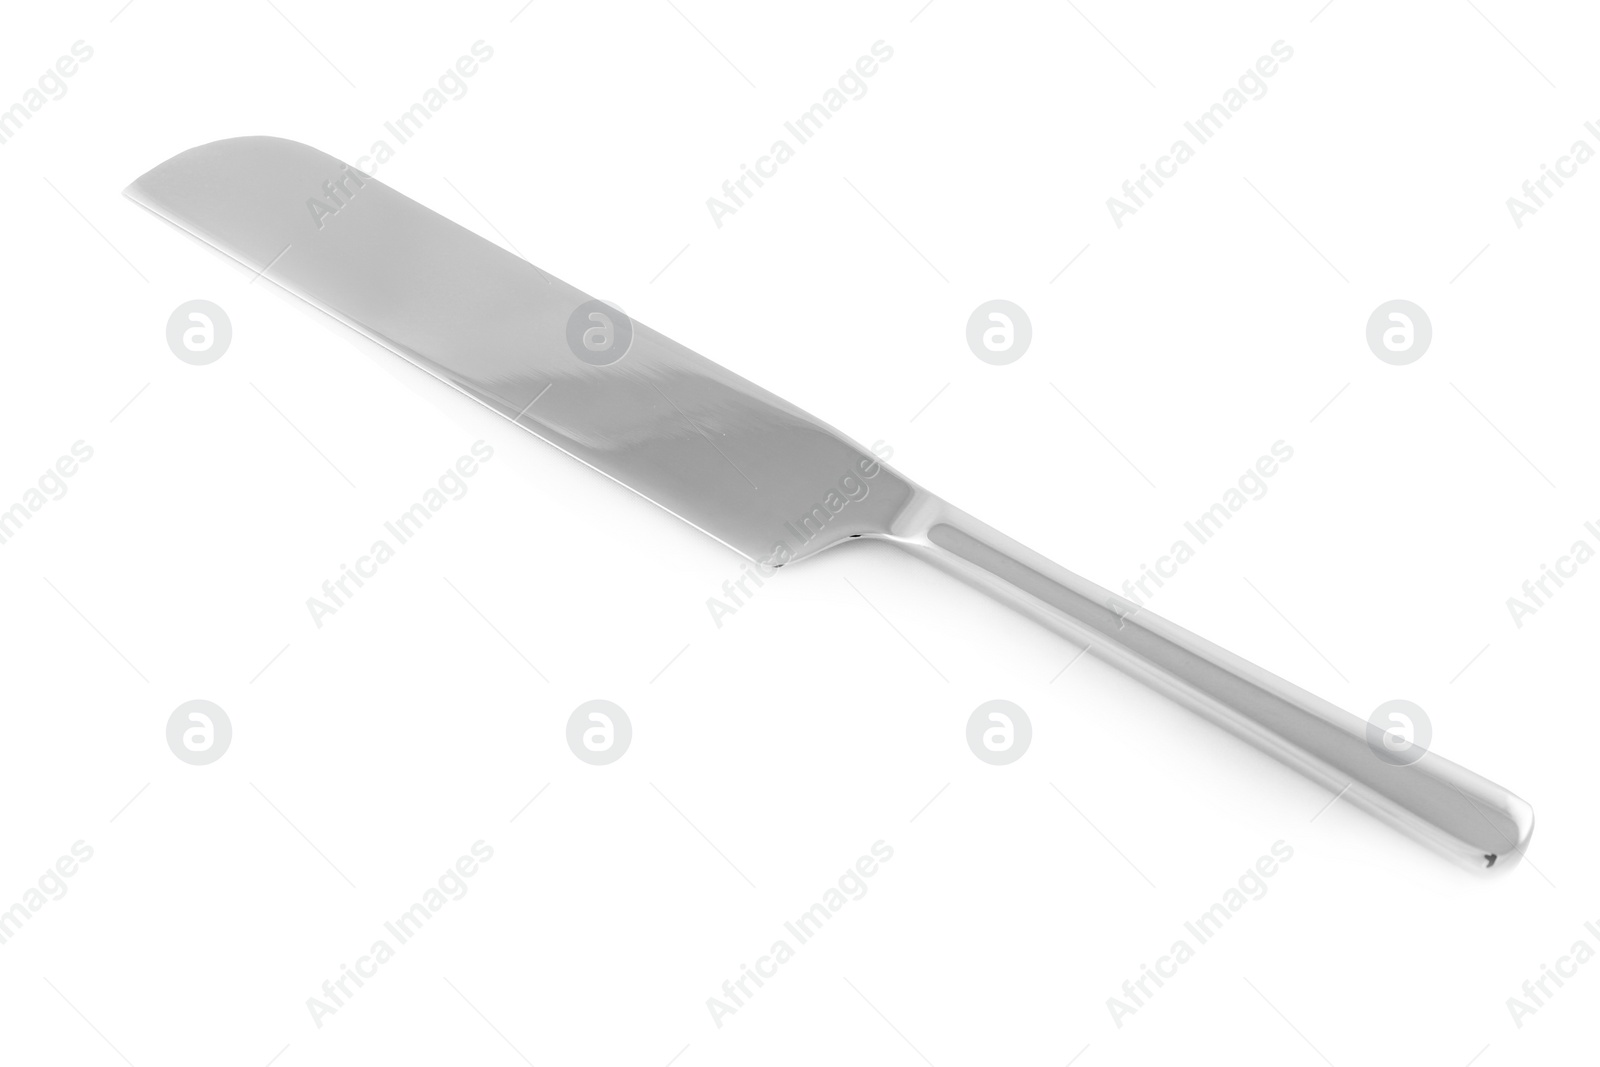 Photo of Clean shiny metal knife isolated on white